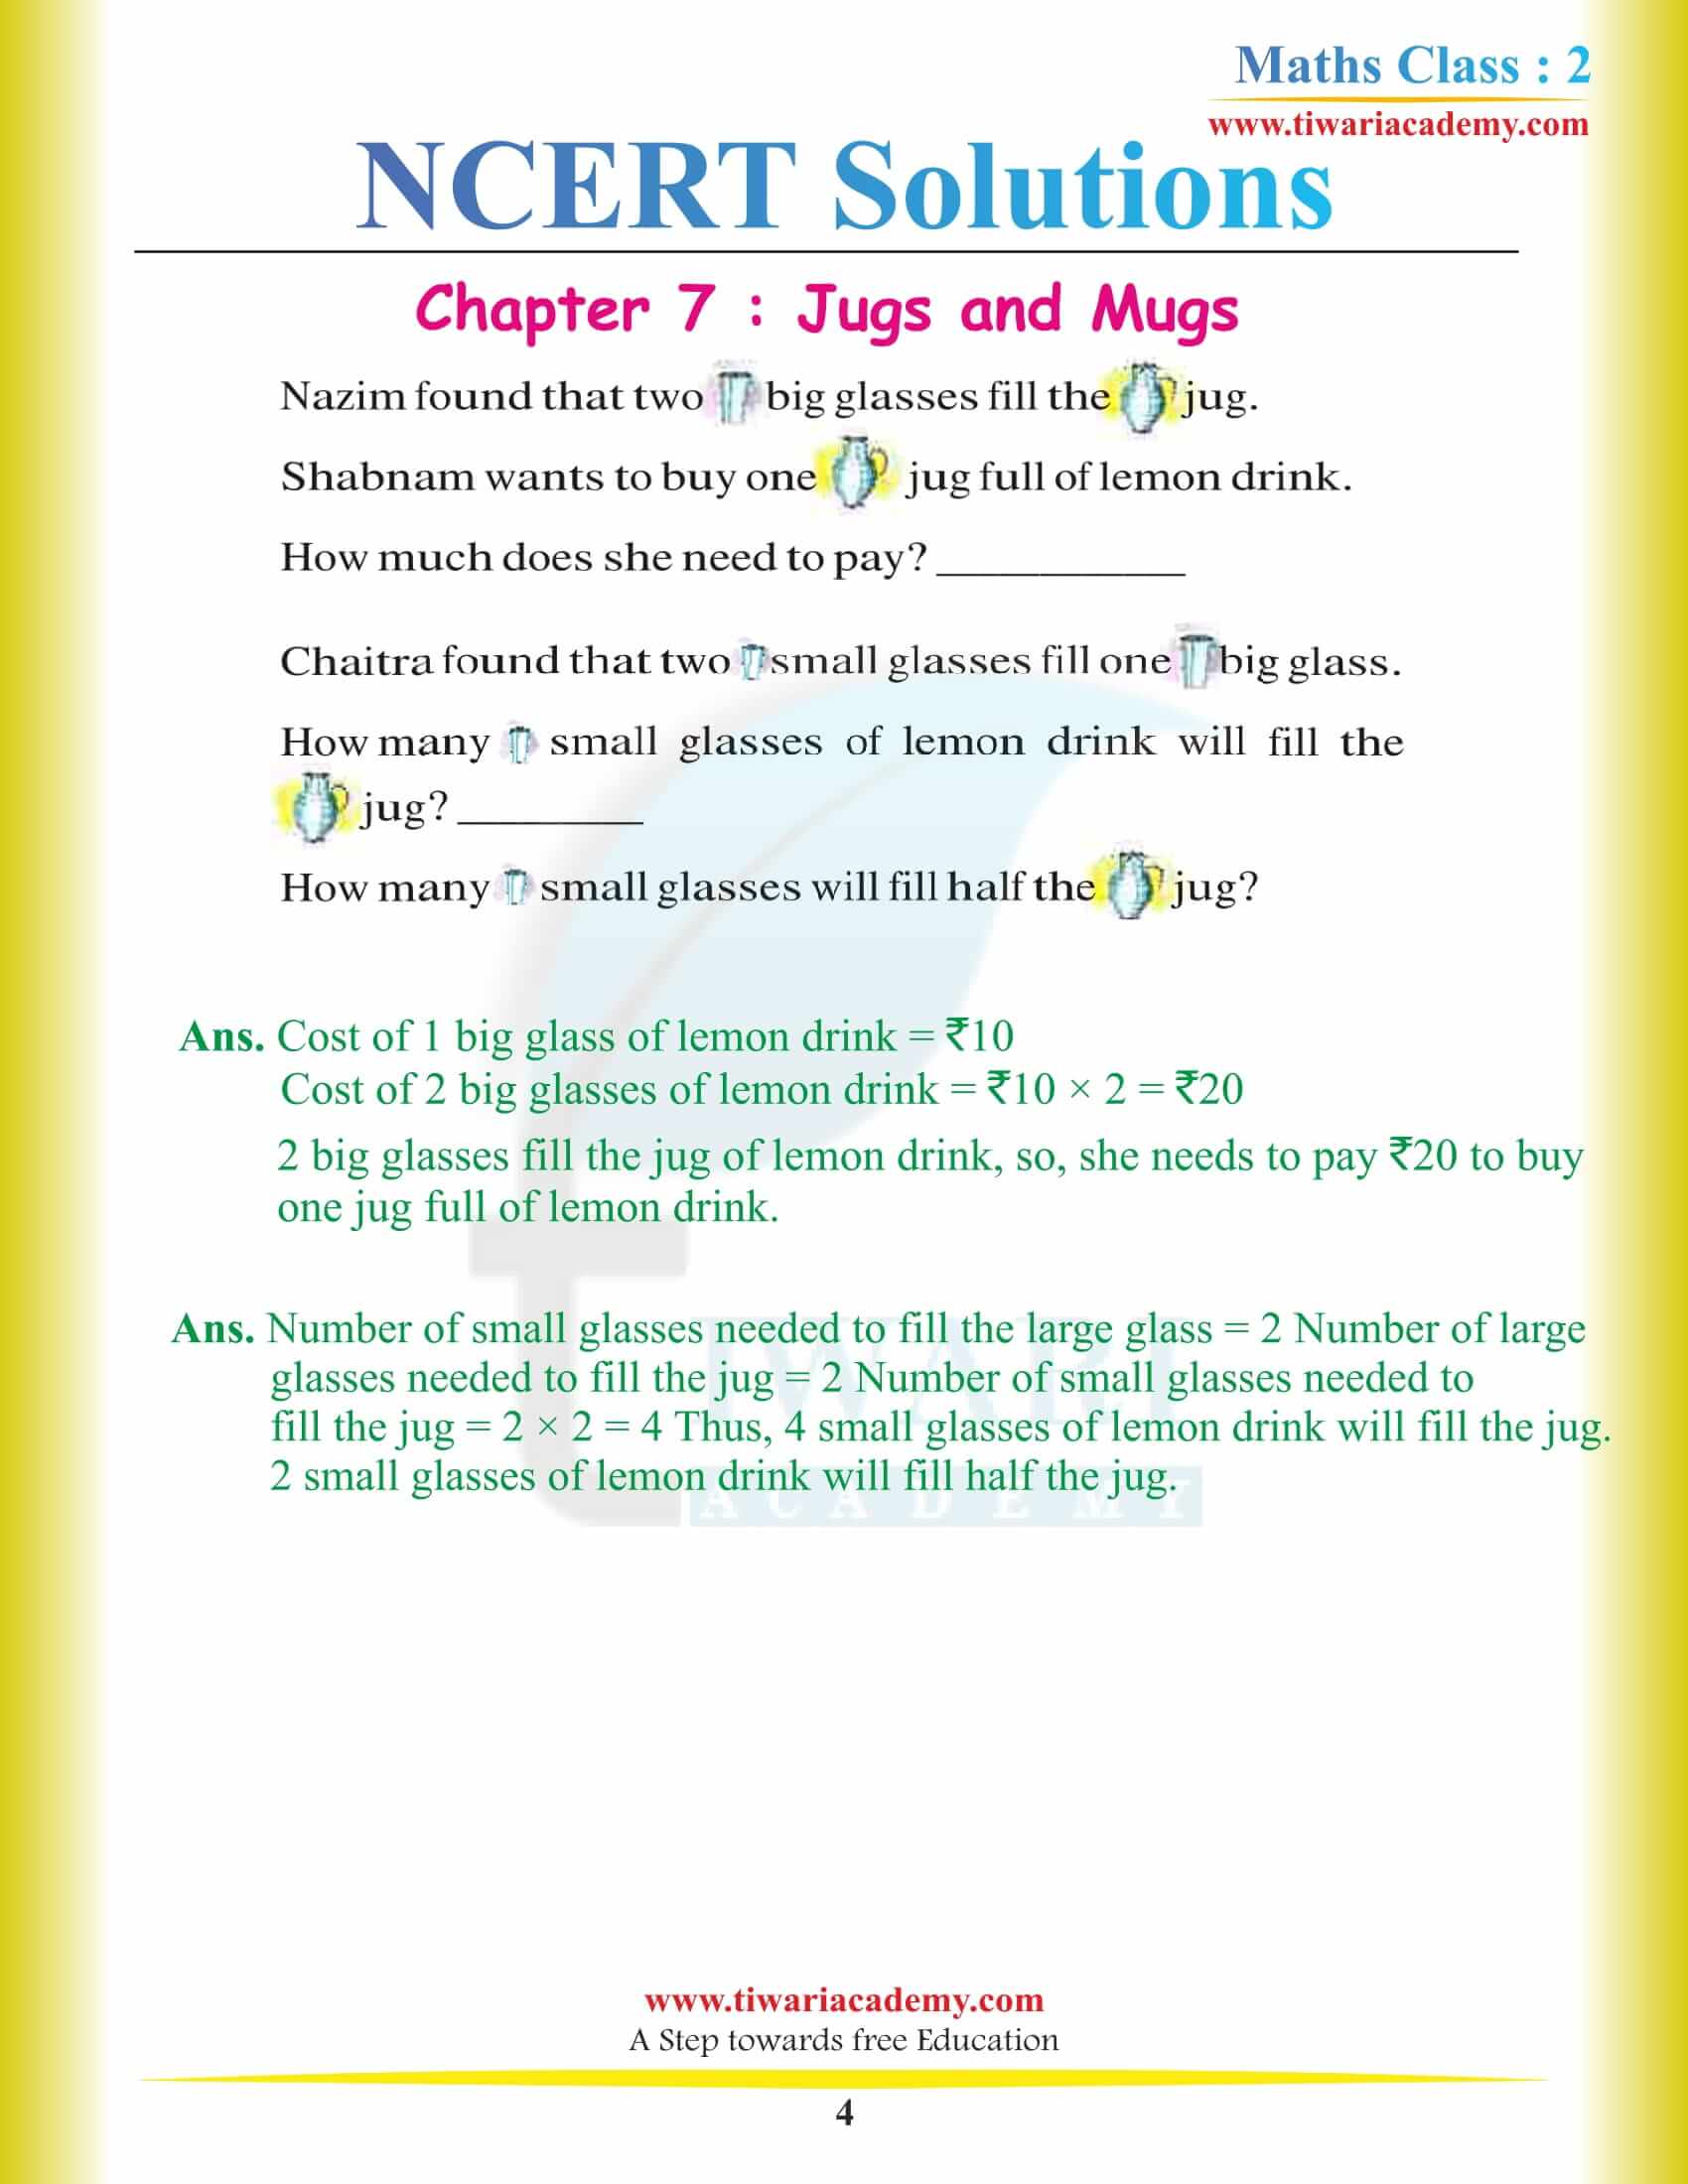 NCERT Solutions for Class 2 Maths Chapter 7 in PDF